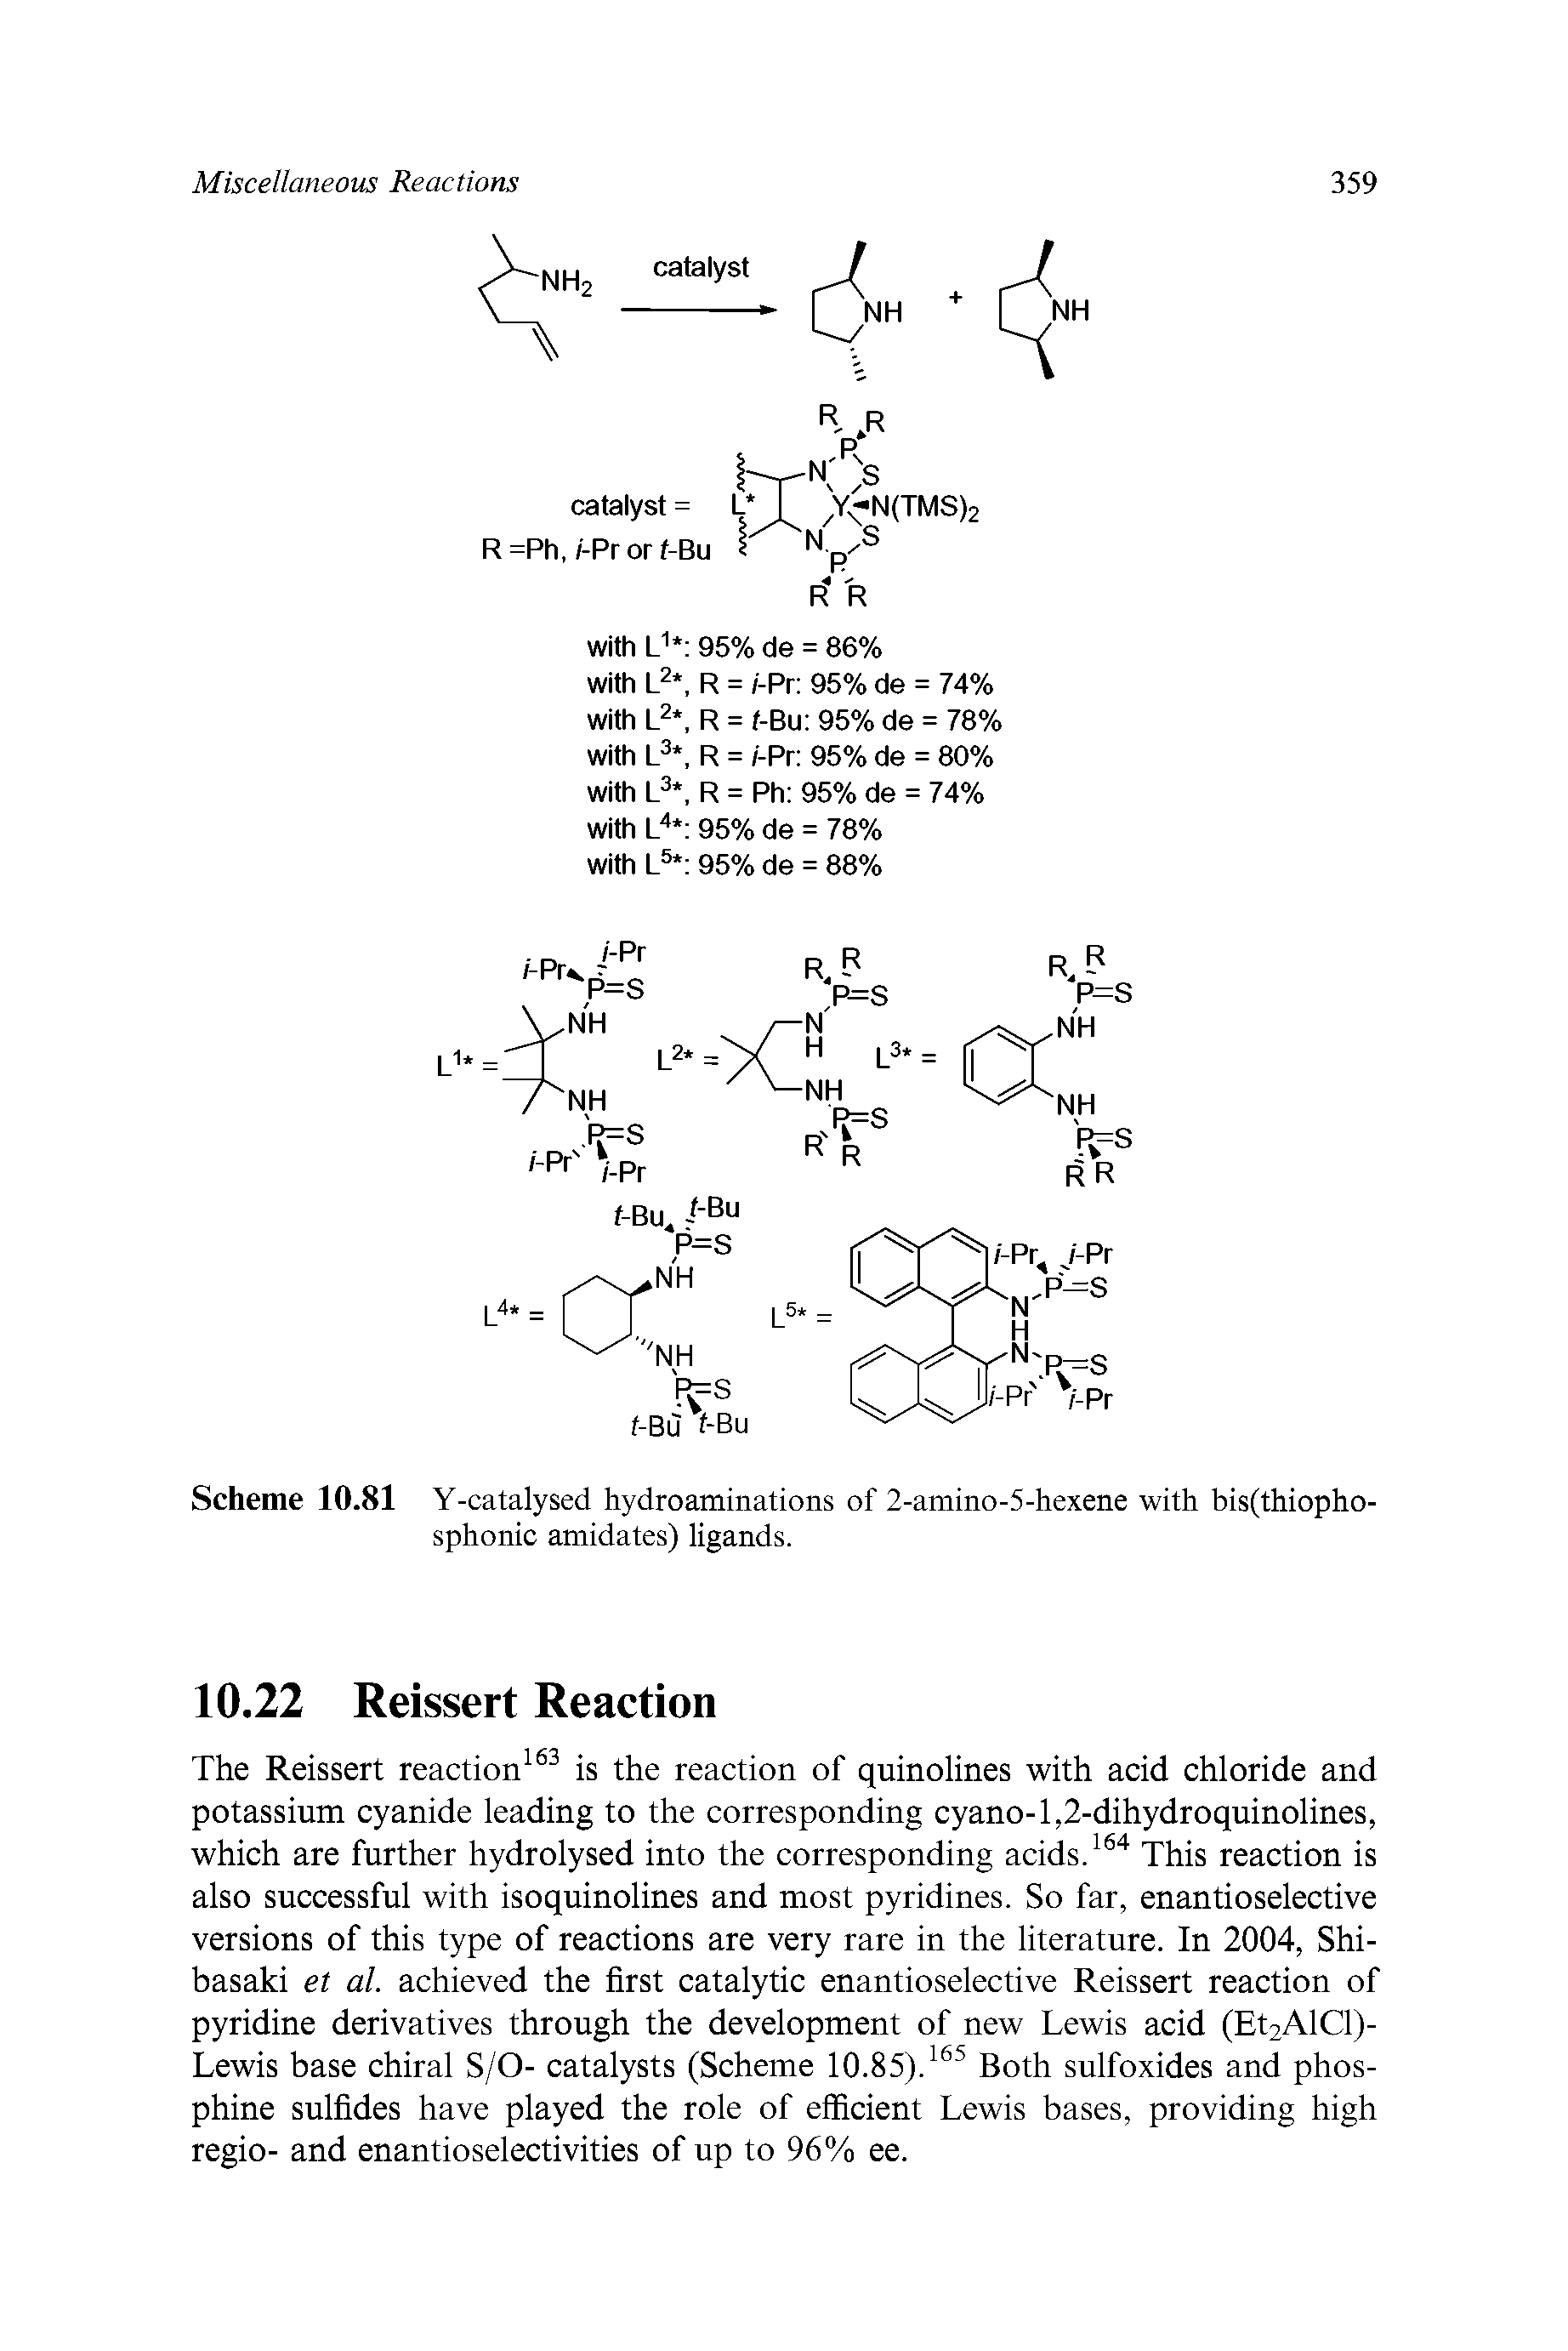 Scheme 10.81 Y-catalysed hydroaminations of 2-amino-5-hexene with bis(thiopho-sphonic amidates) ligands.